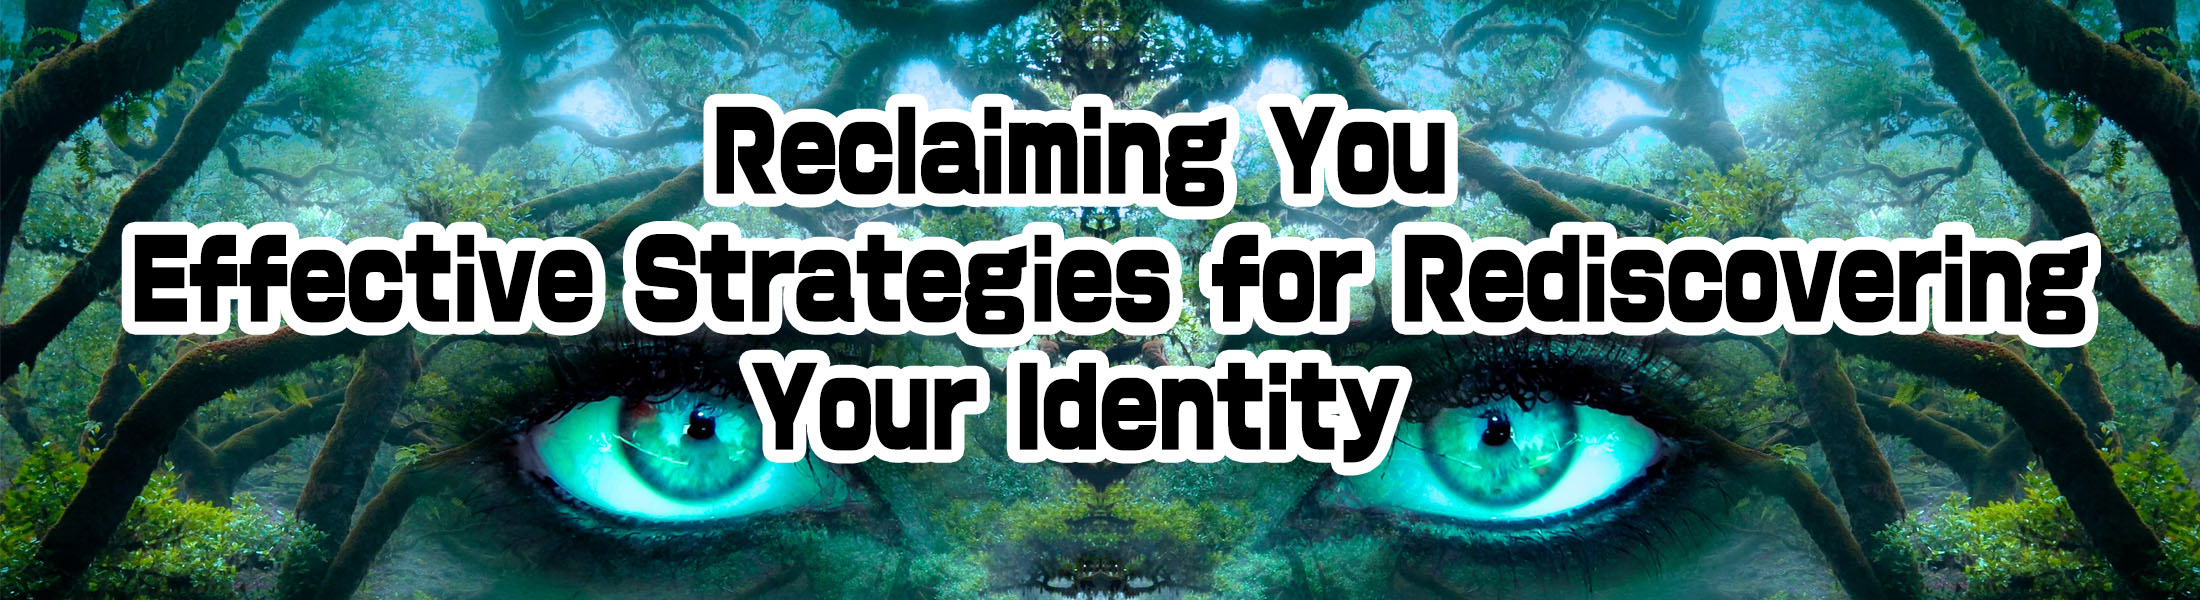 Reclaiming Your Power: Strategies for Feeling Empowered